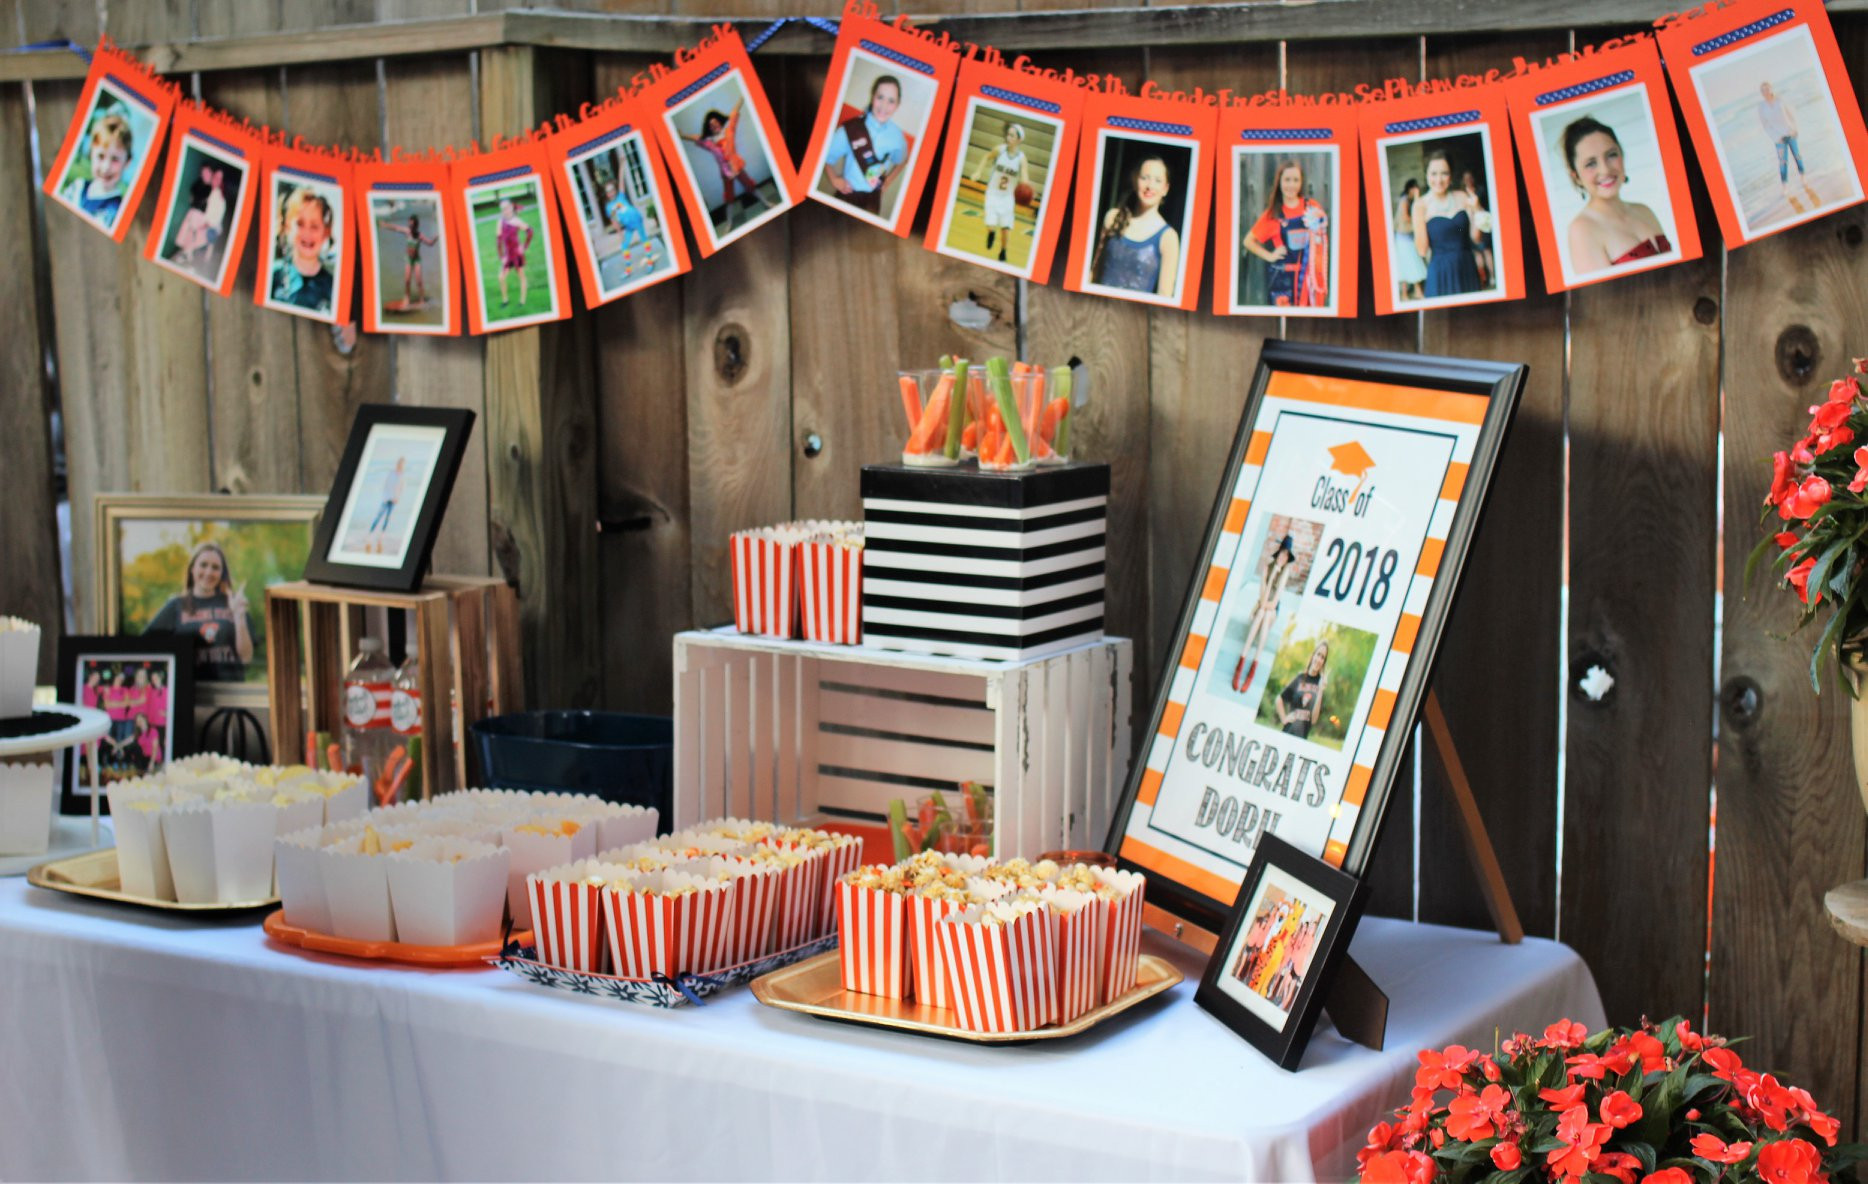 Ideas For A College Graduation Party
 Graduation Party Ideas How to Celebrate Your Senior s Big Day